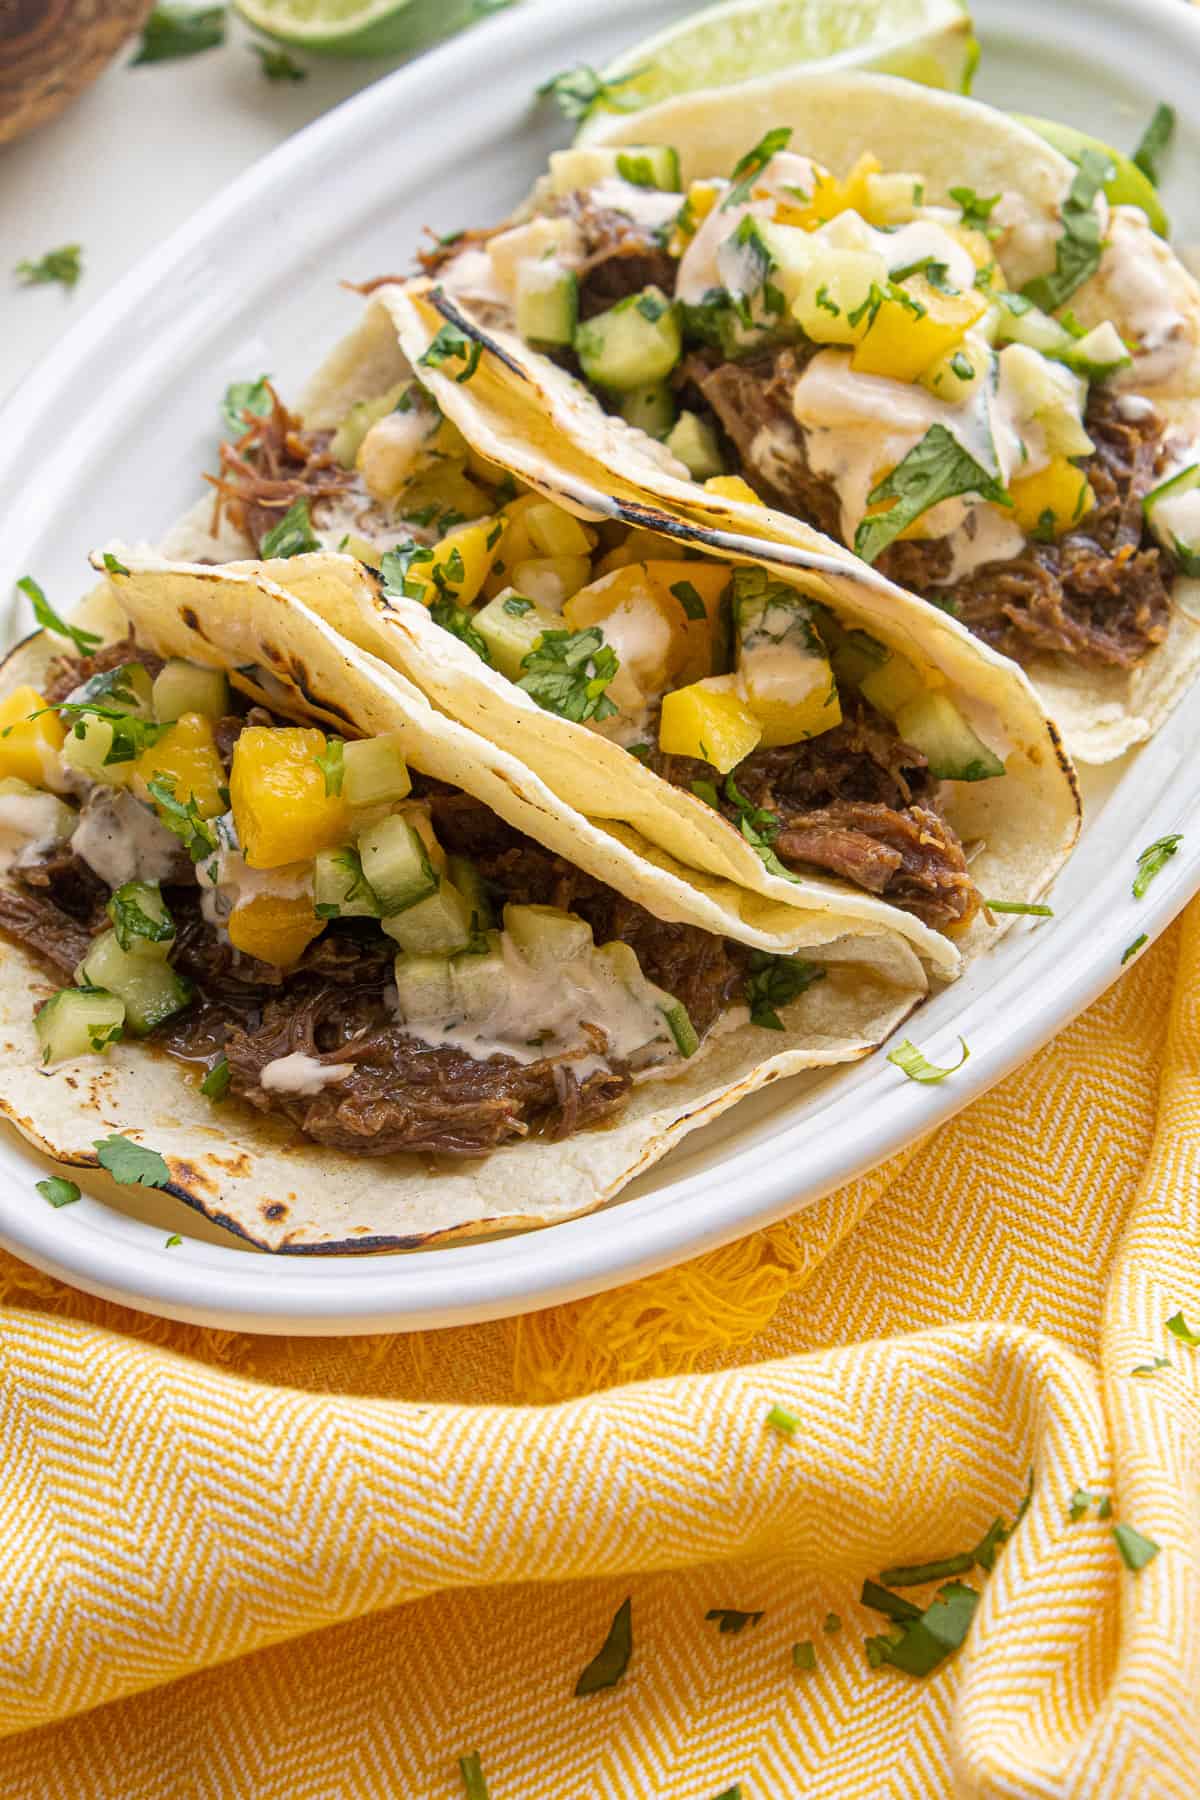 The plated tacos are displayed so that the shredded beef filling, sriracha mayo, and mango cucumber salad are visible.